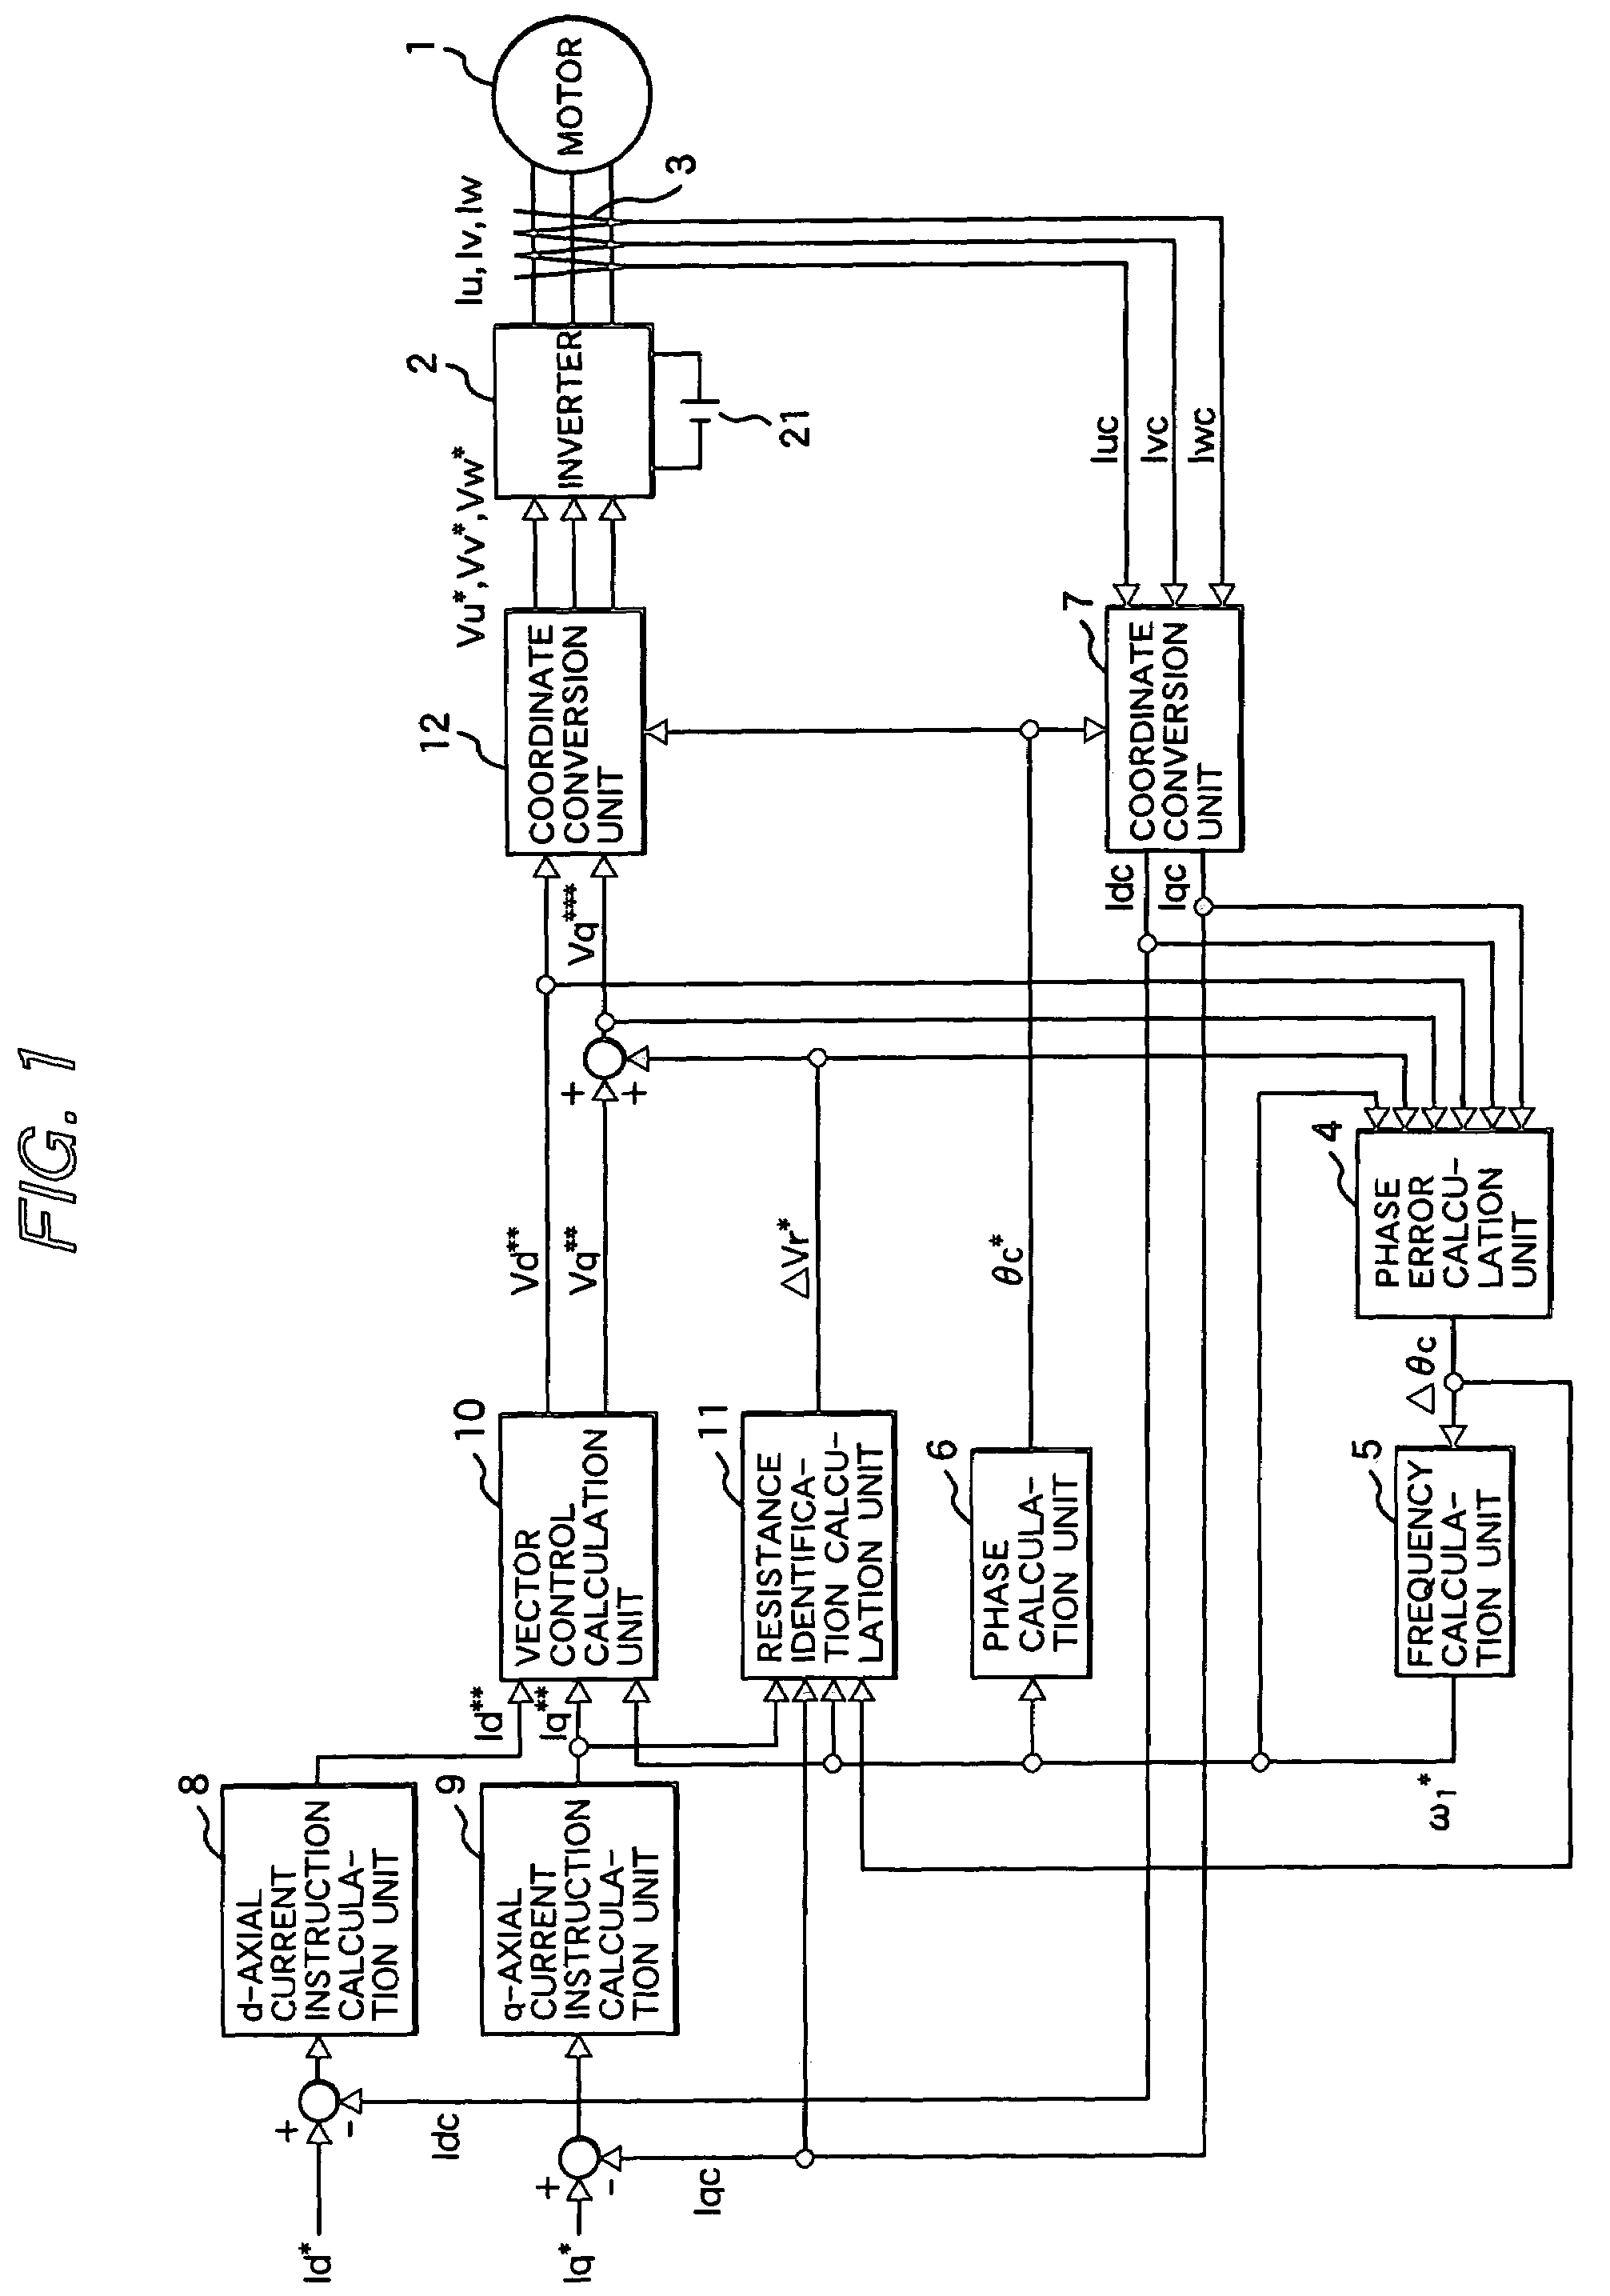 Control system for permanent magnet synchronous motor and module